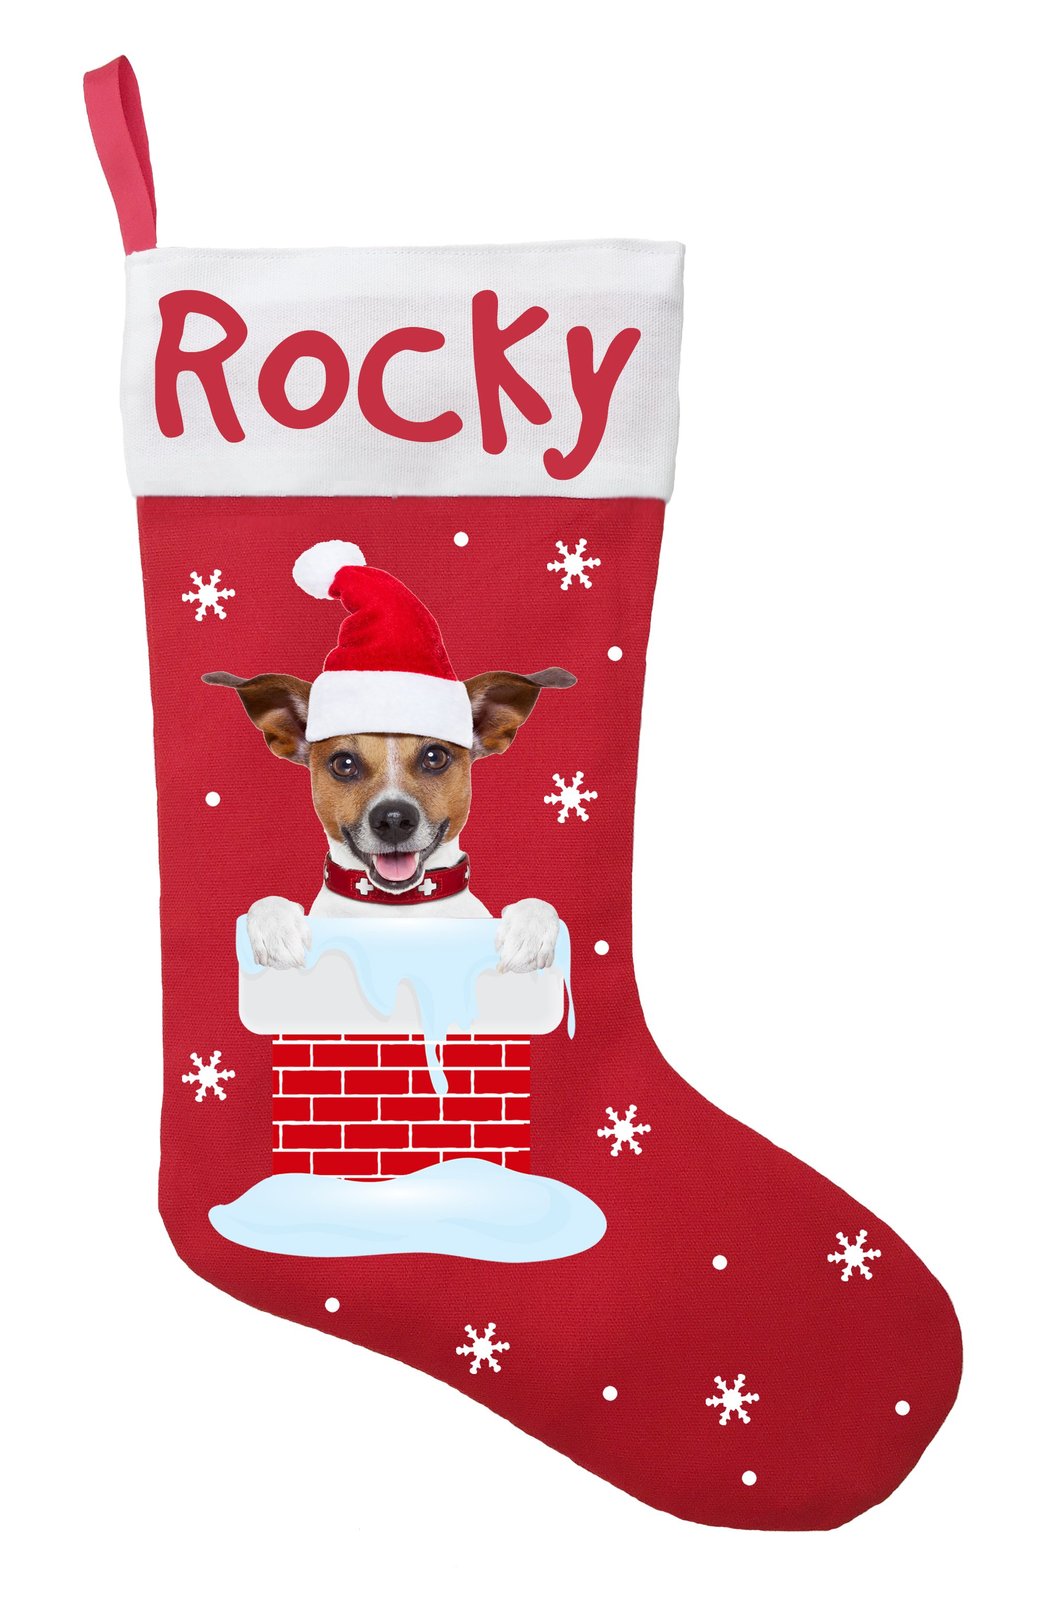 Jack Russell Terrier Christmas Stocking-Personalized Jack Russel Stocking - Red - $33.00